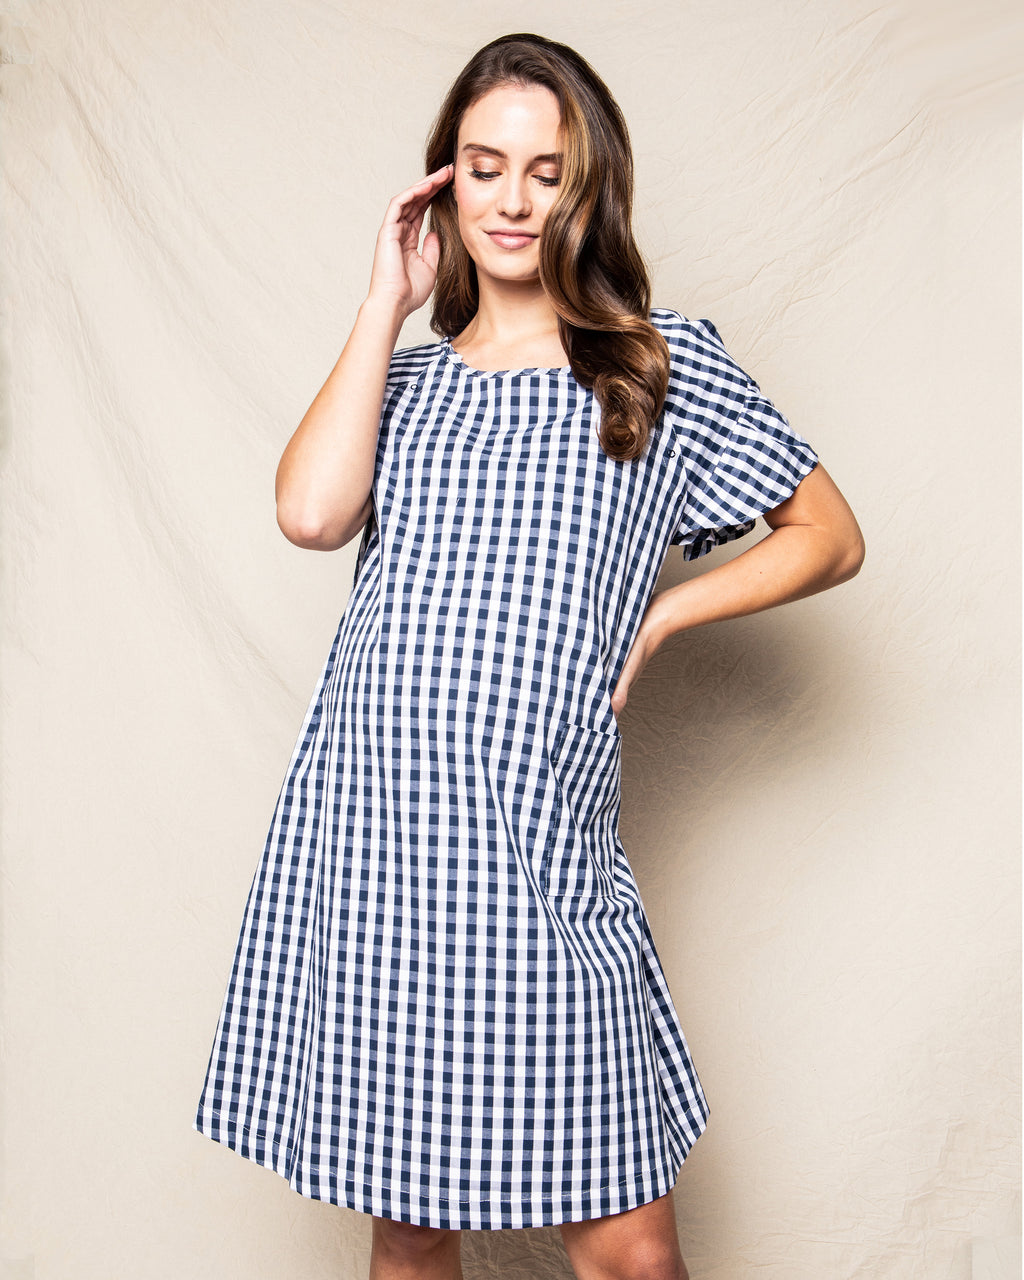 Women's Twill Hospital Gown in Navy Gingham